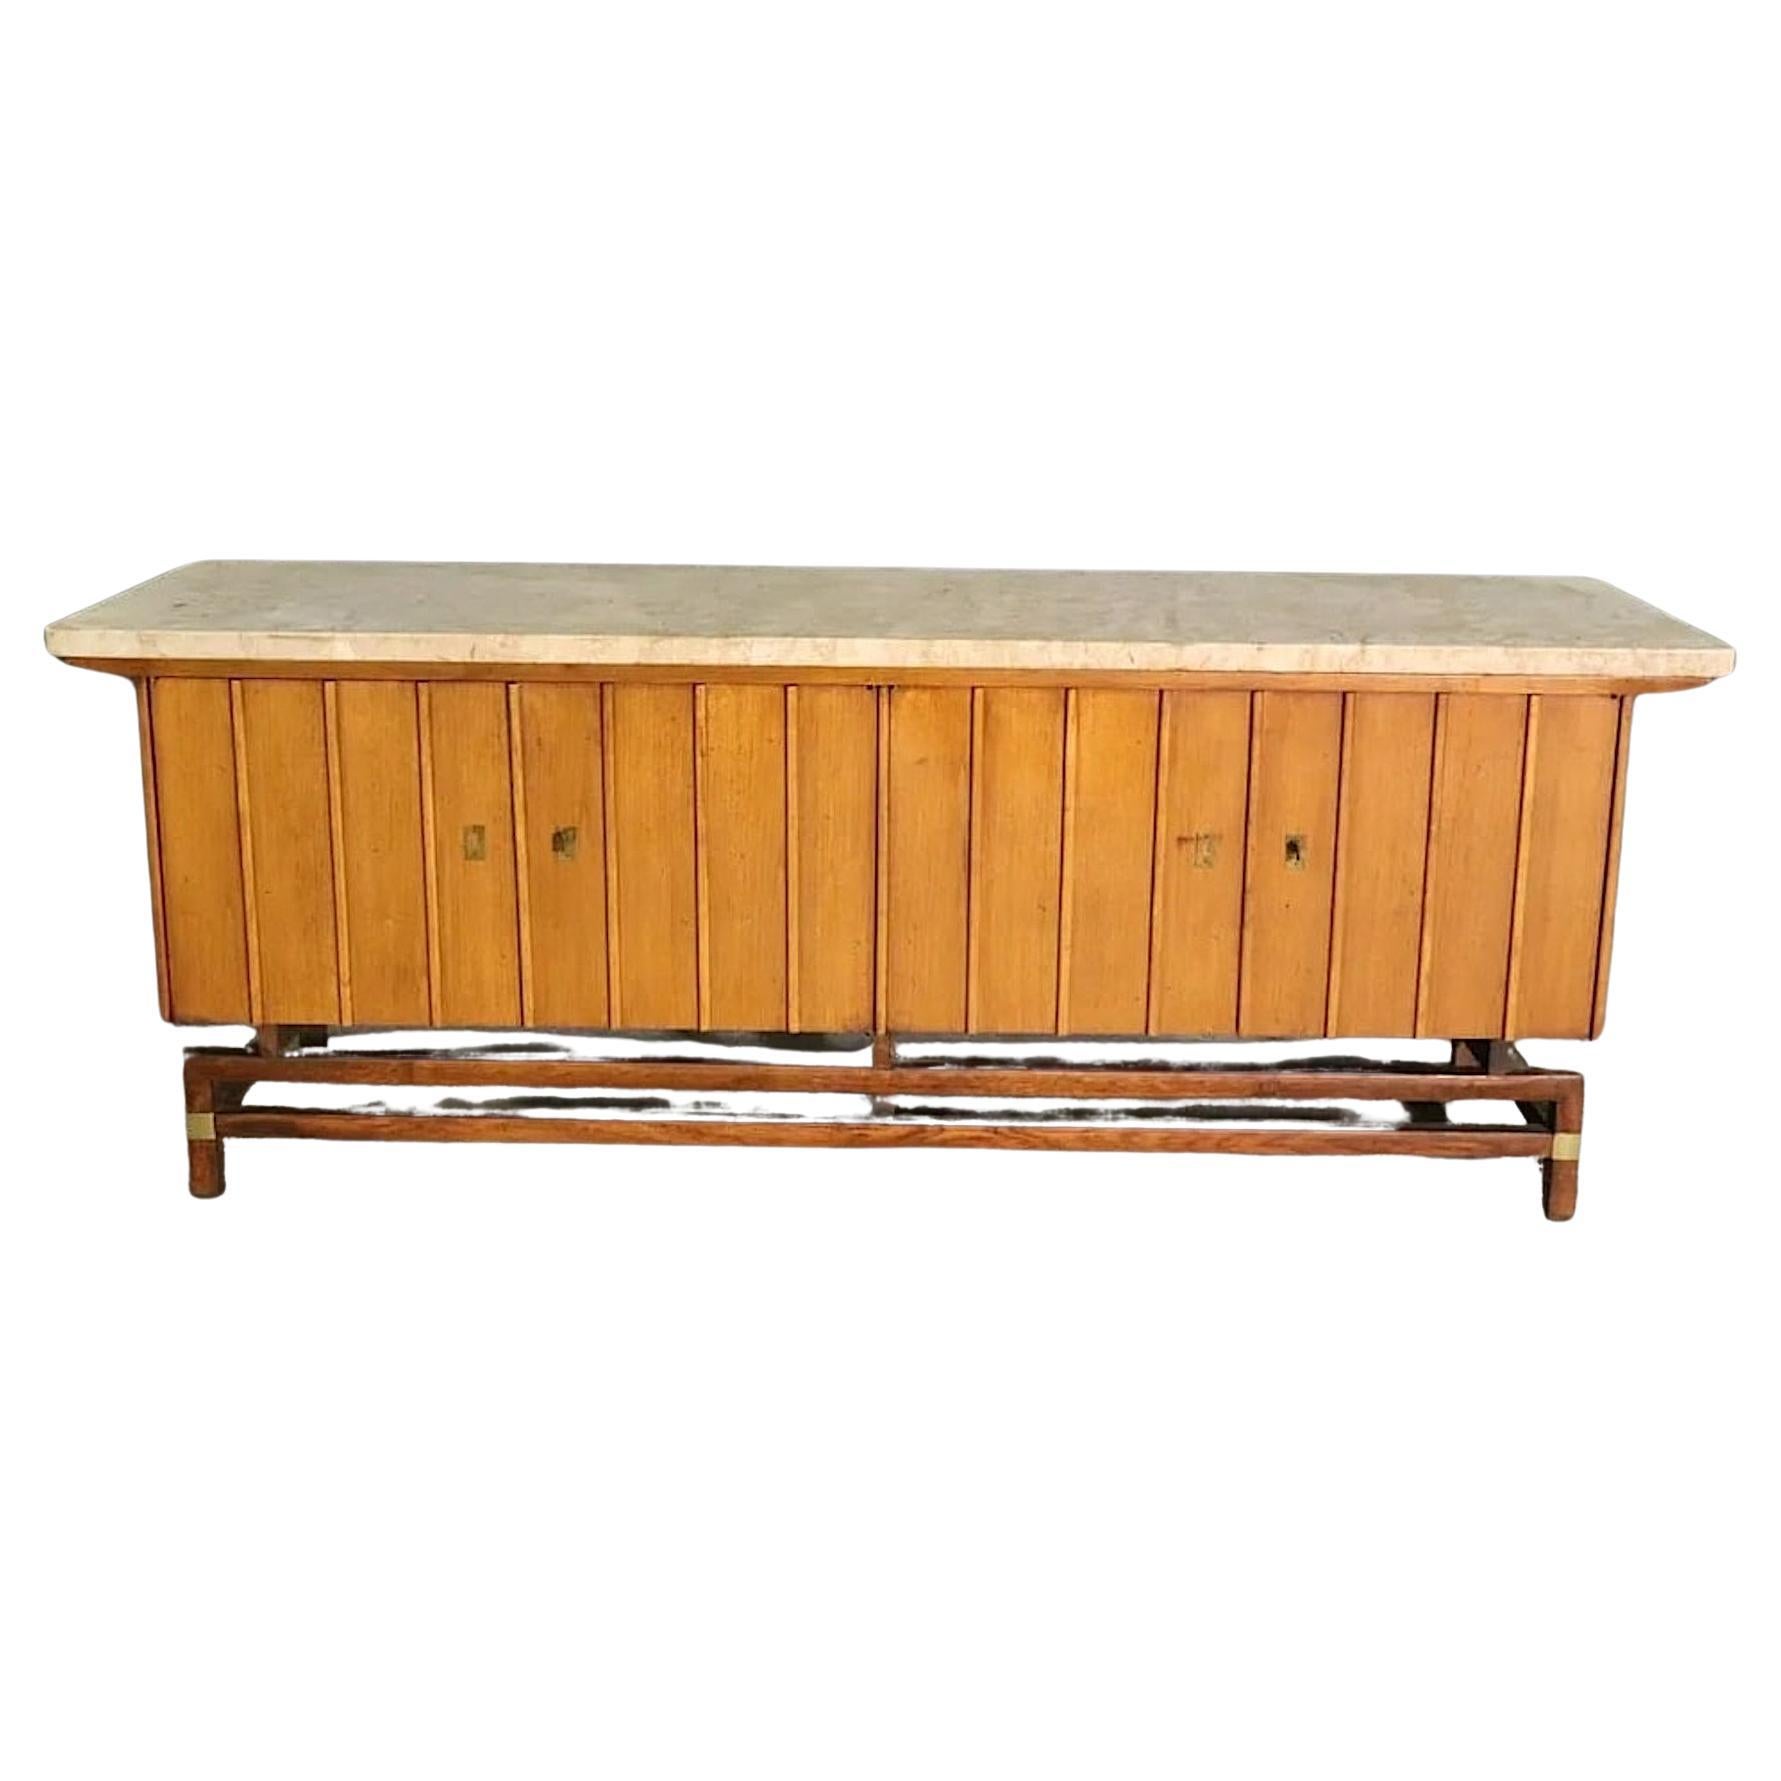 'Tung Si' Series Credenza by Hickory For Sale